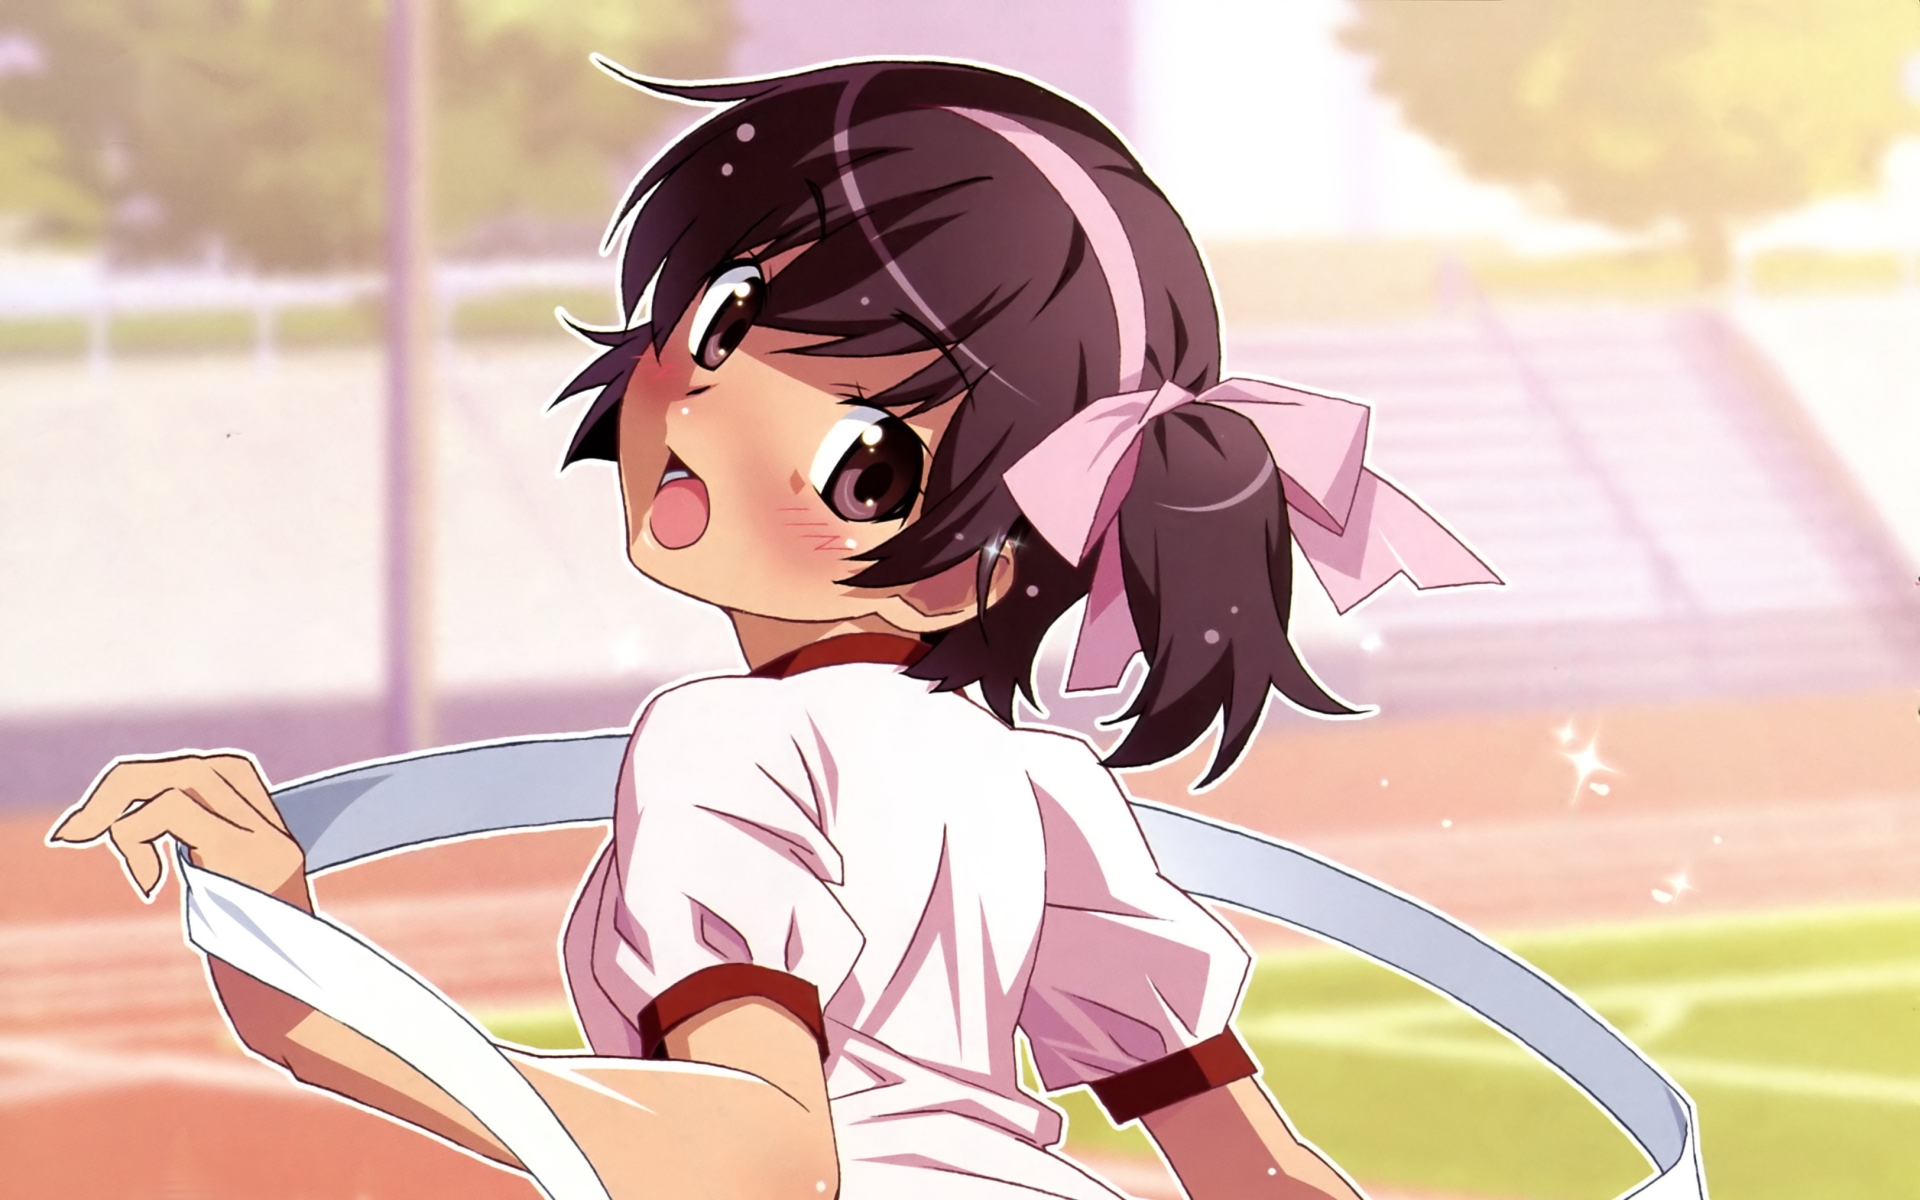 The World God Only Knows HD Wallpaper Background Image